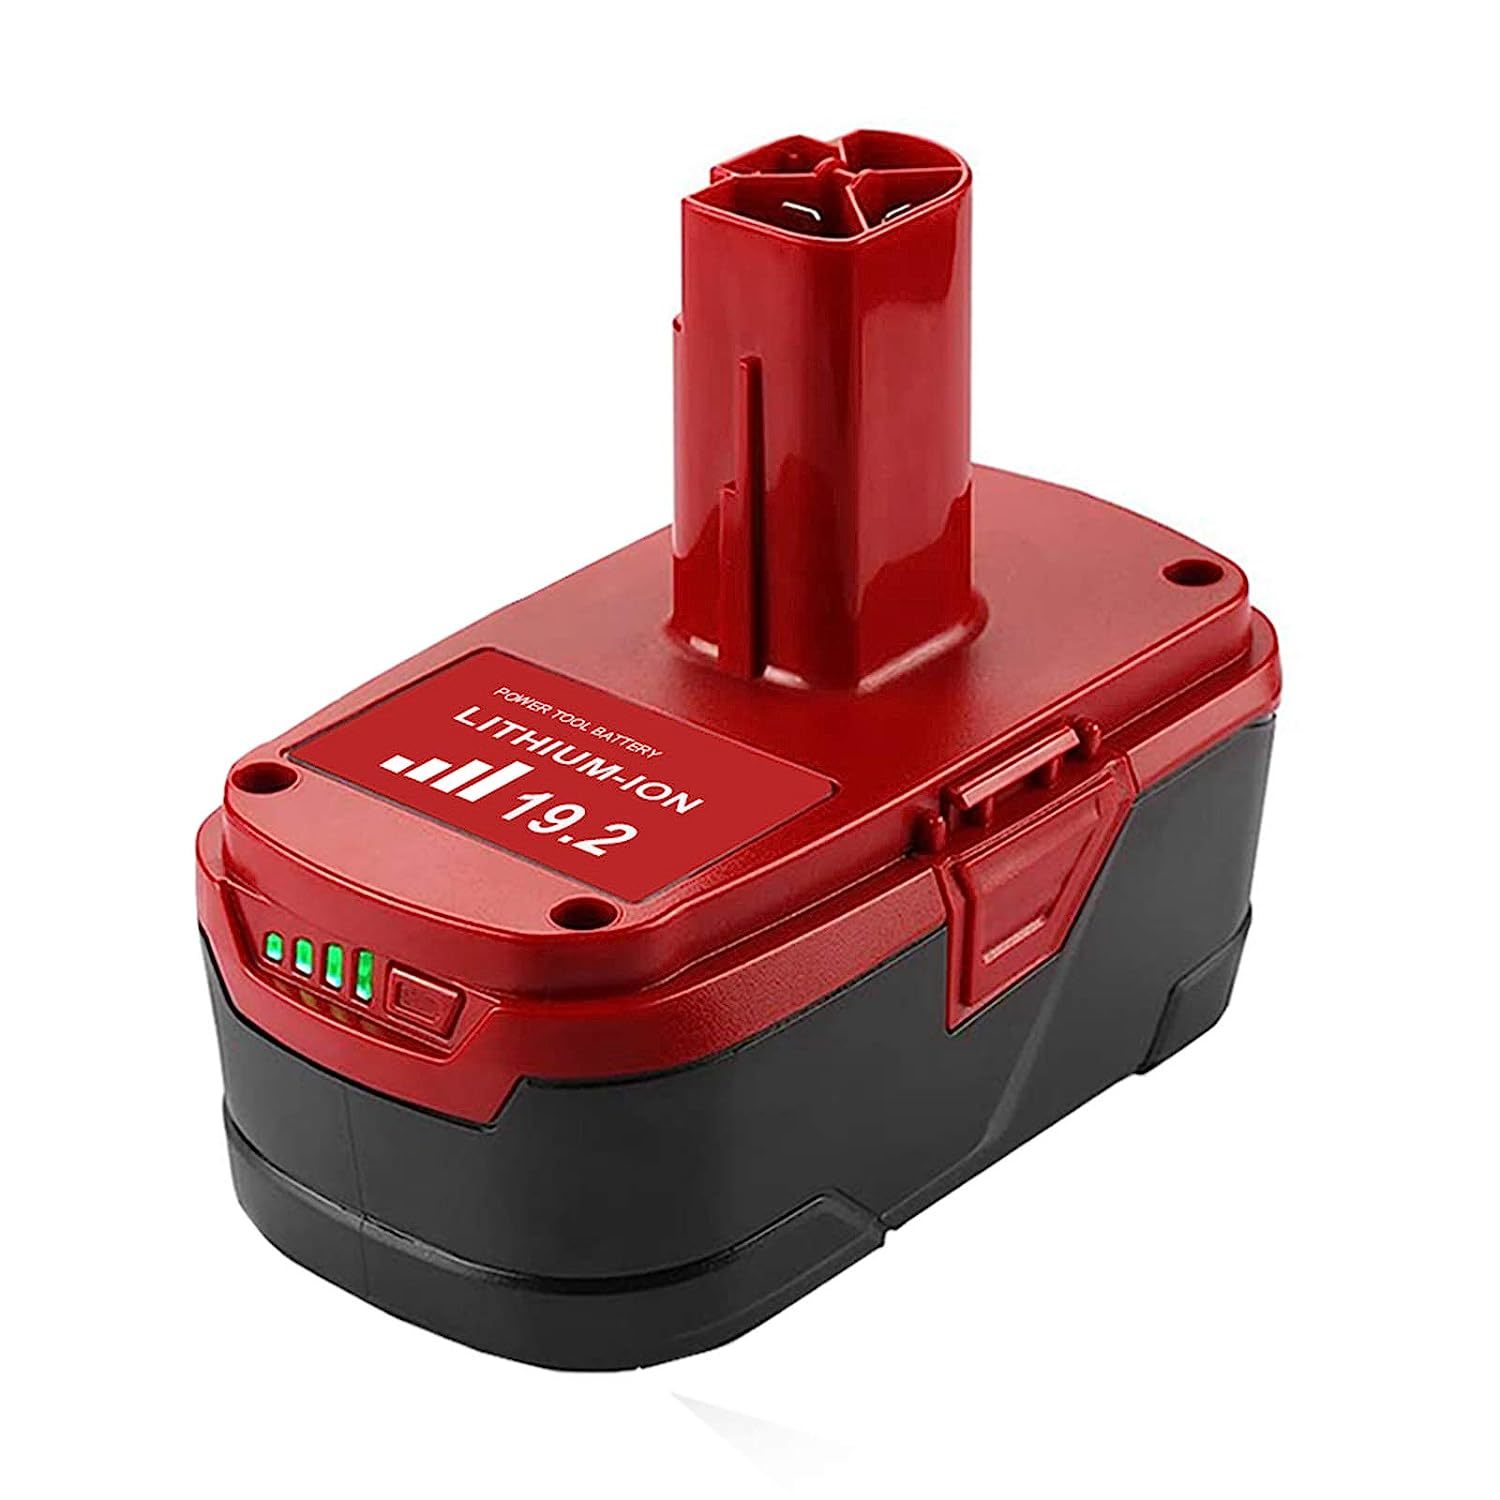 6.0Ah Replacement For Craftsman 19.2 Volt Lithium Battery 130279005 1323903 1302 - $58.99